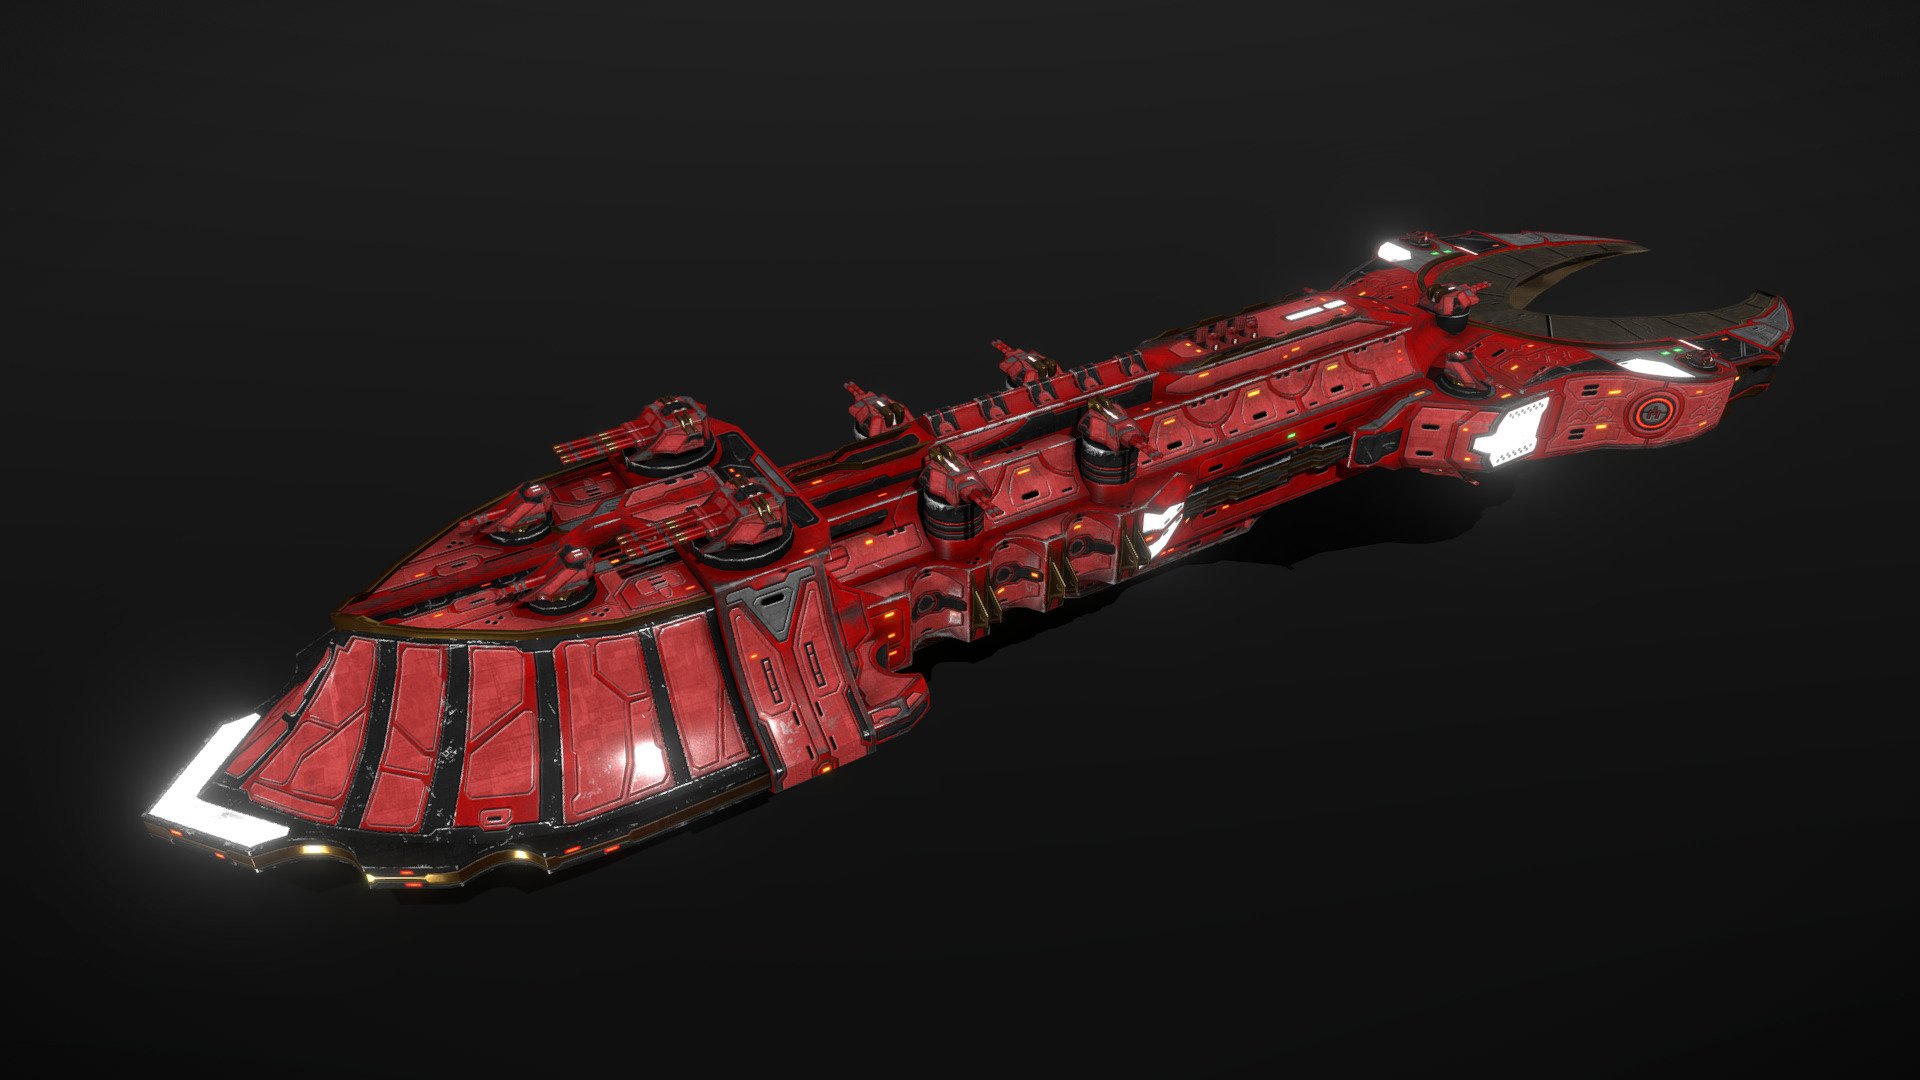 This is a model of a low-poly and game-ready scifi spaceship / space structure model. 

The weapons are separate meshes and can be animated with a keyframe animation tool. The weapon loadout can be changed too. 

The model comes with several differently colored texture sets. The PSD file with intact layers is included.

If you have purchased this model please make sure to download the “additional file”.  It contains FBX and OBJ meshes, full resolution textures and the source PSDs with intact layers. The meshes are separate and can be animated (e.g. firing animations for gun barrels, rotating turrets, etc) 3d model